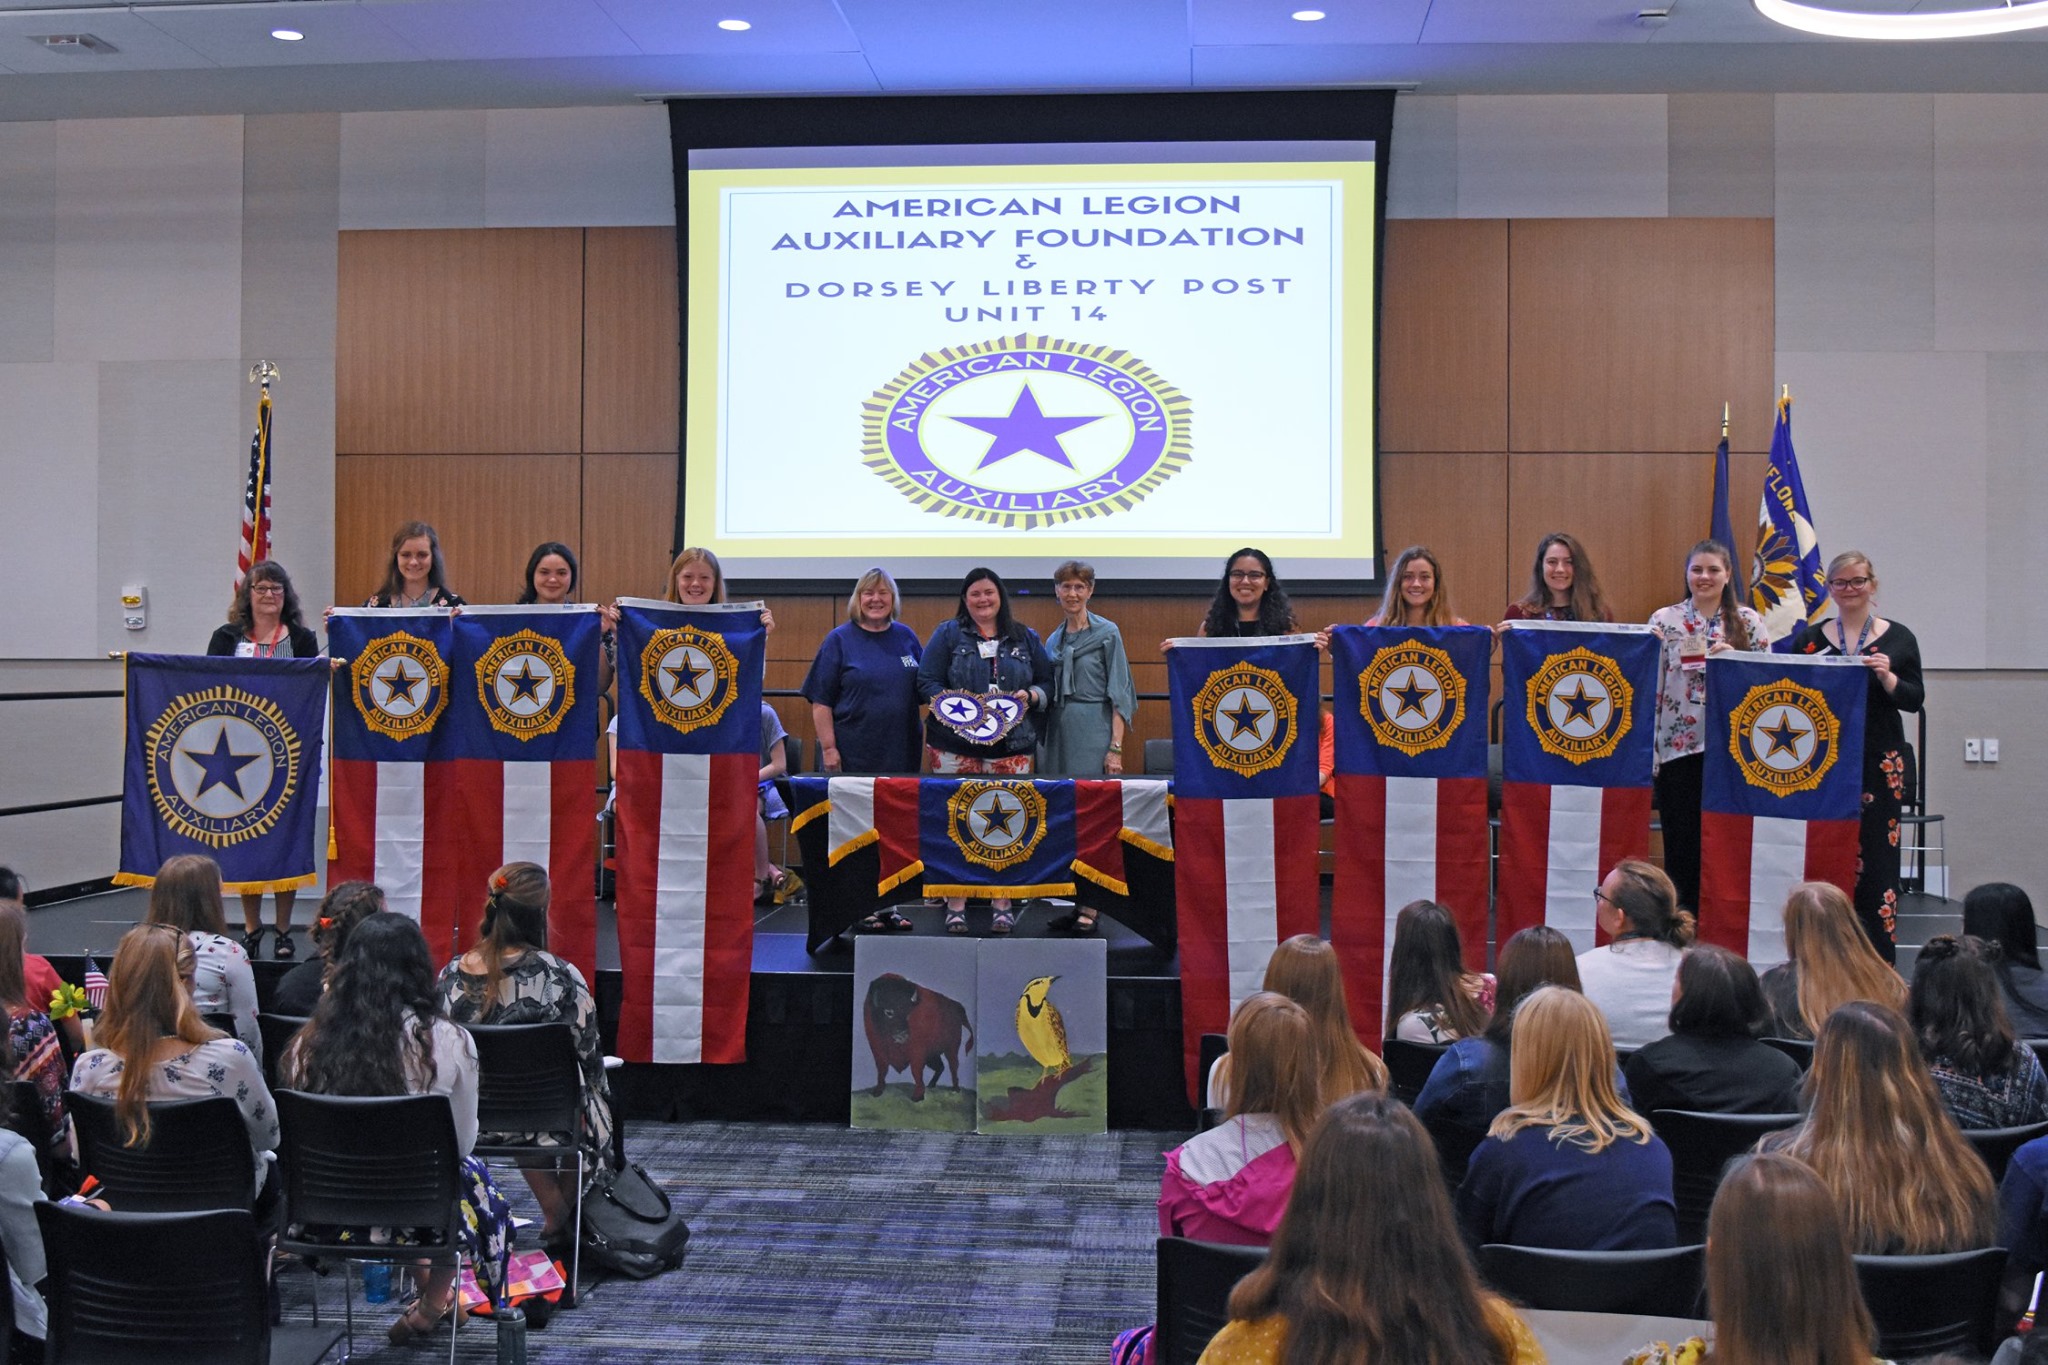 American Legion Auxiliary Kansas Girls State program increases branding and awareness with help of ALA Foundation grant